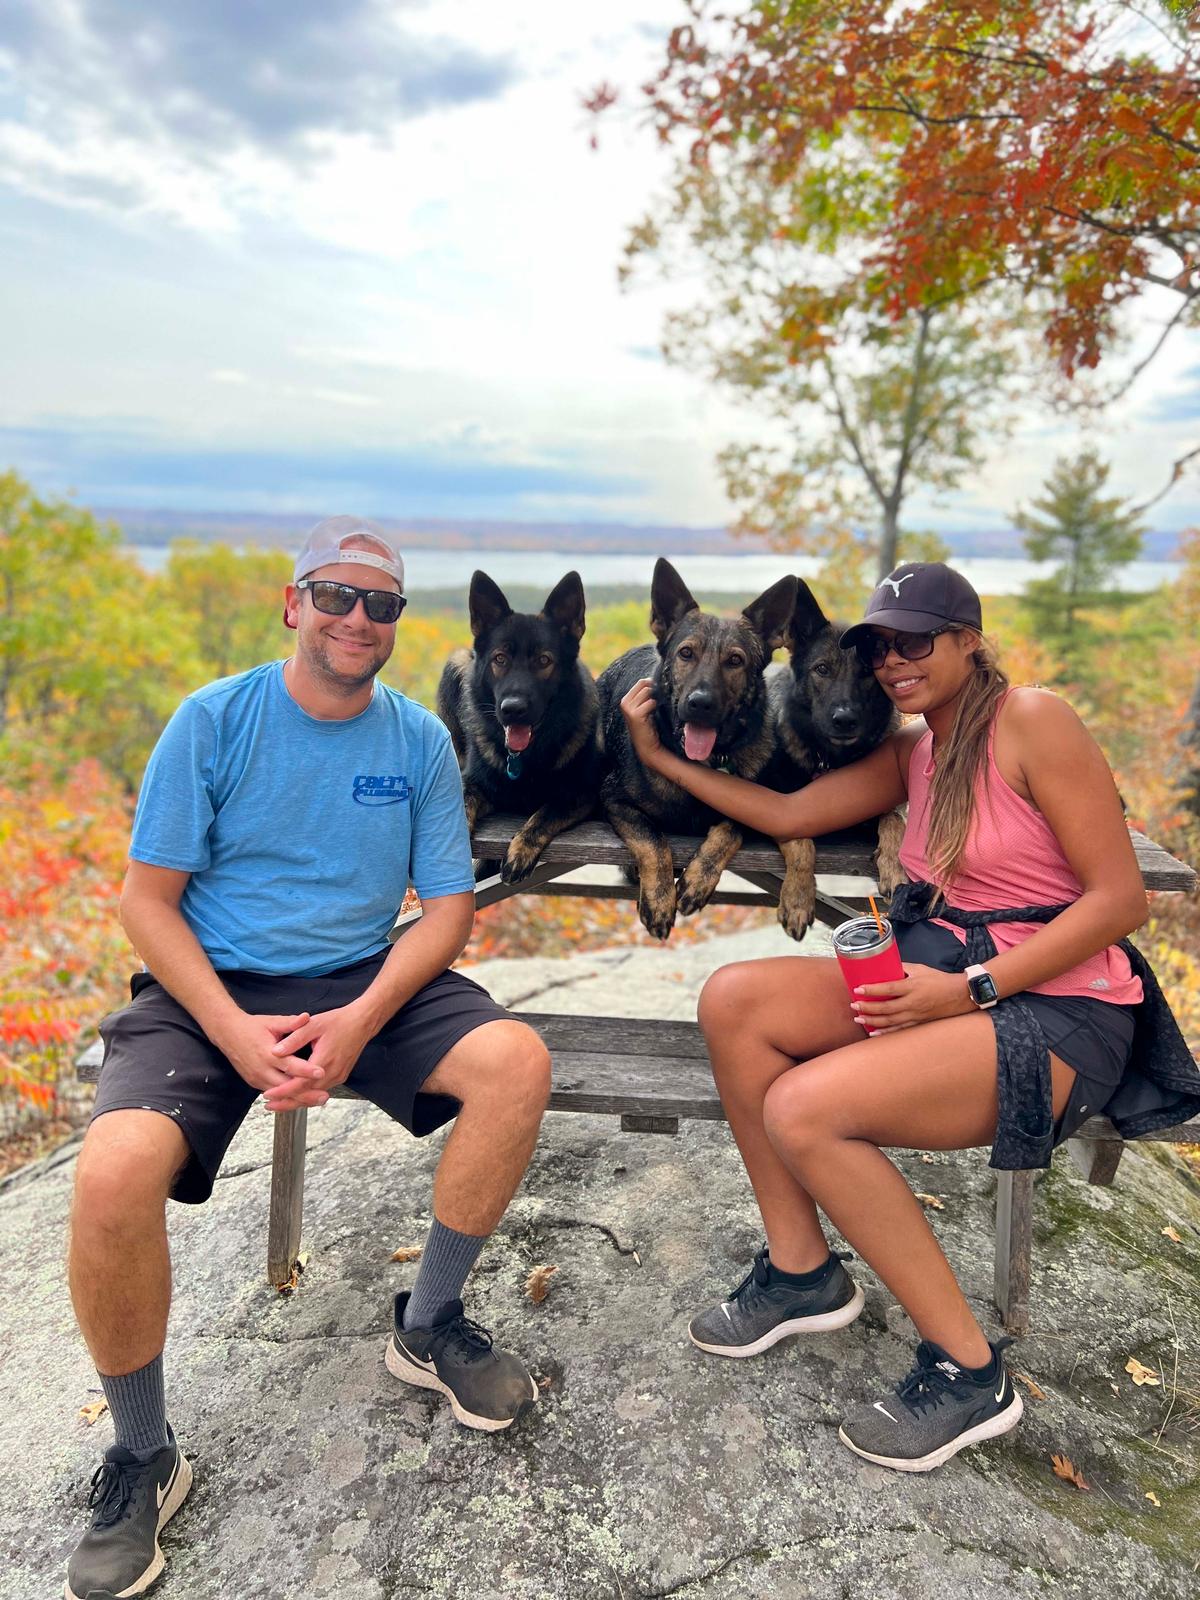 Mr. and Mrs. Moise with their three dogs: Jet, Jasper, and Jade. (Courtesy of <a href="https://www.instagram.com/jadethesablegsd">Jade the Sable GSD</a>)